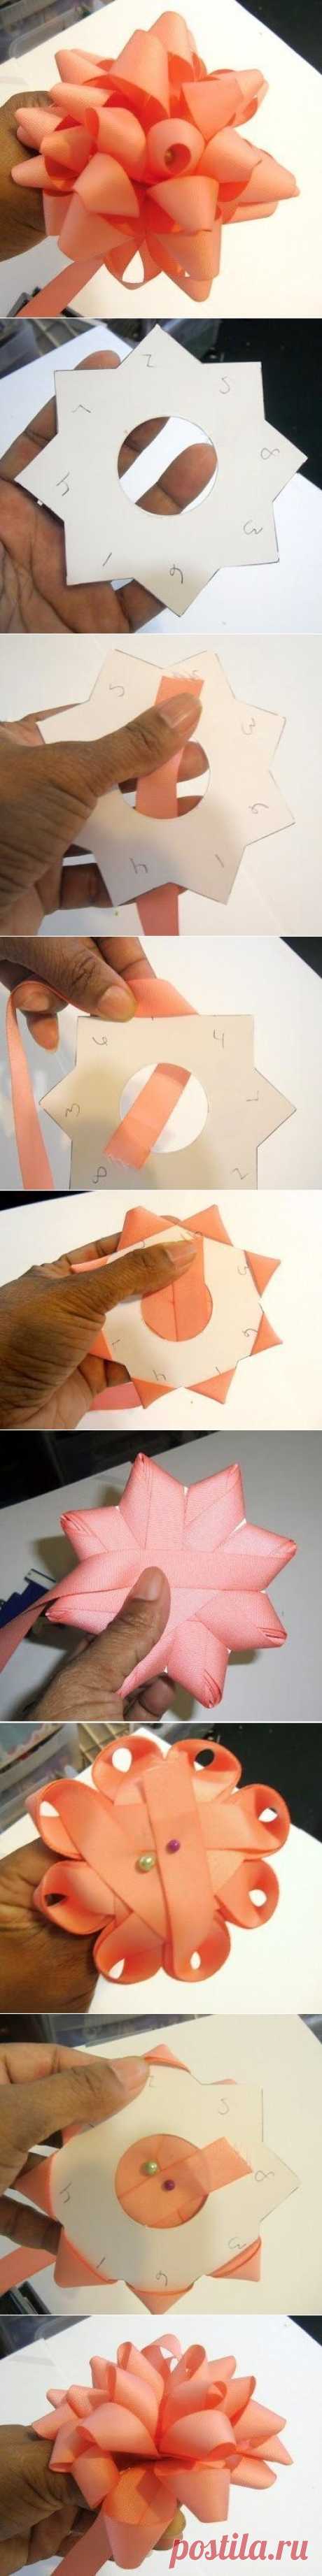 DIY Ribbon Bow | FabDIY All you need for this project is some ribbon and a nice cut...